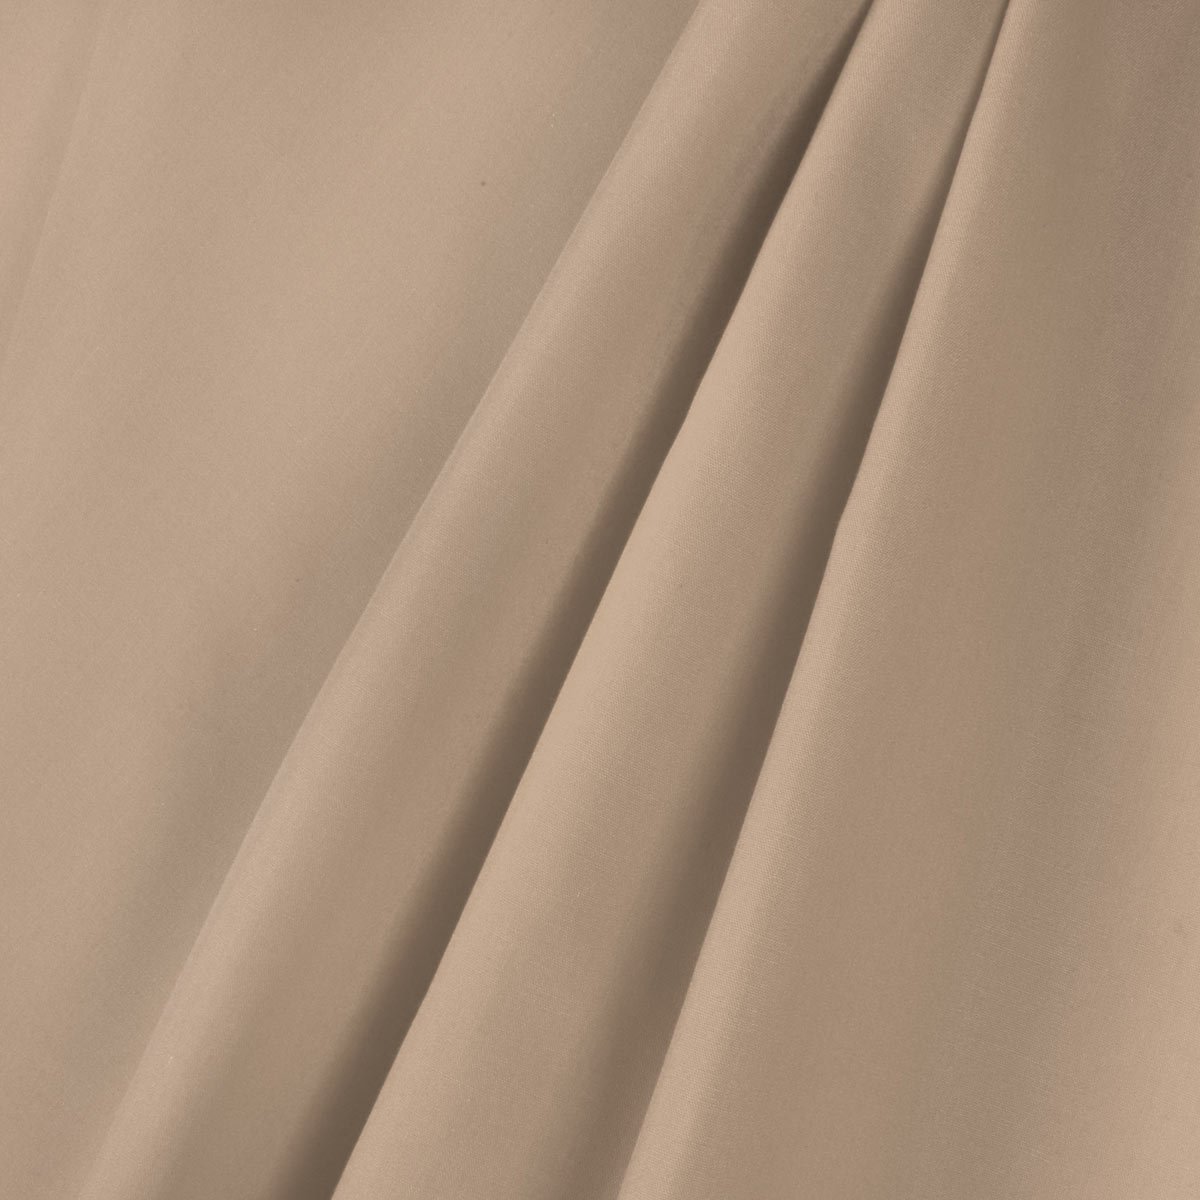 Cotton Polyester Broadcloth (44/45 inch) Fabric - Tan / Yard Many Colors Available